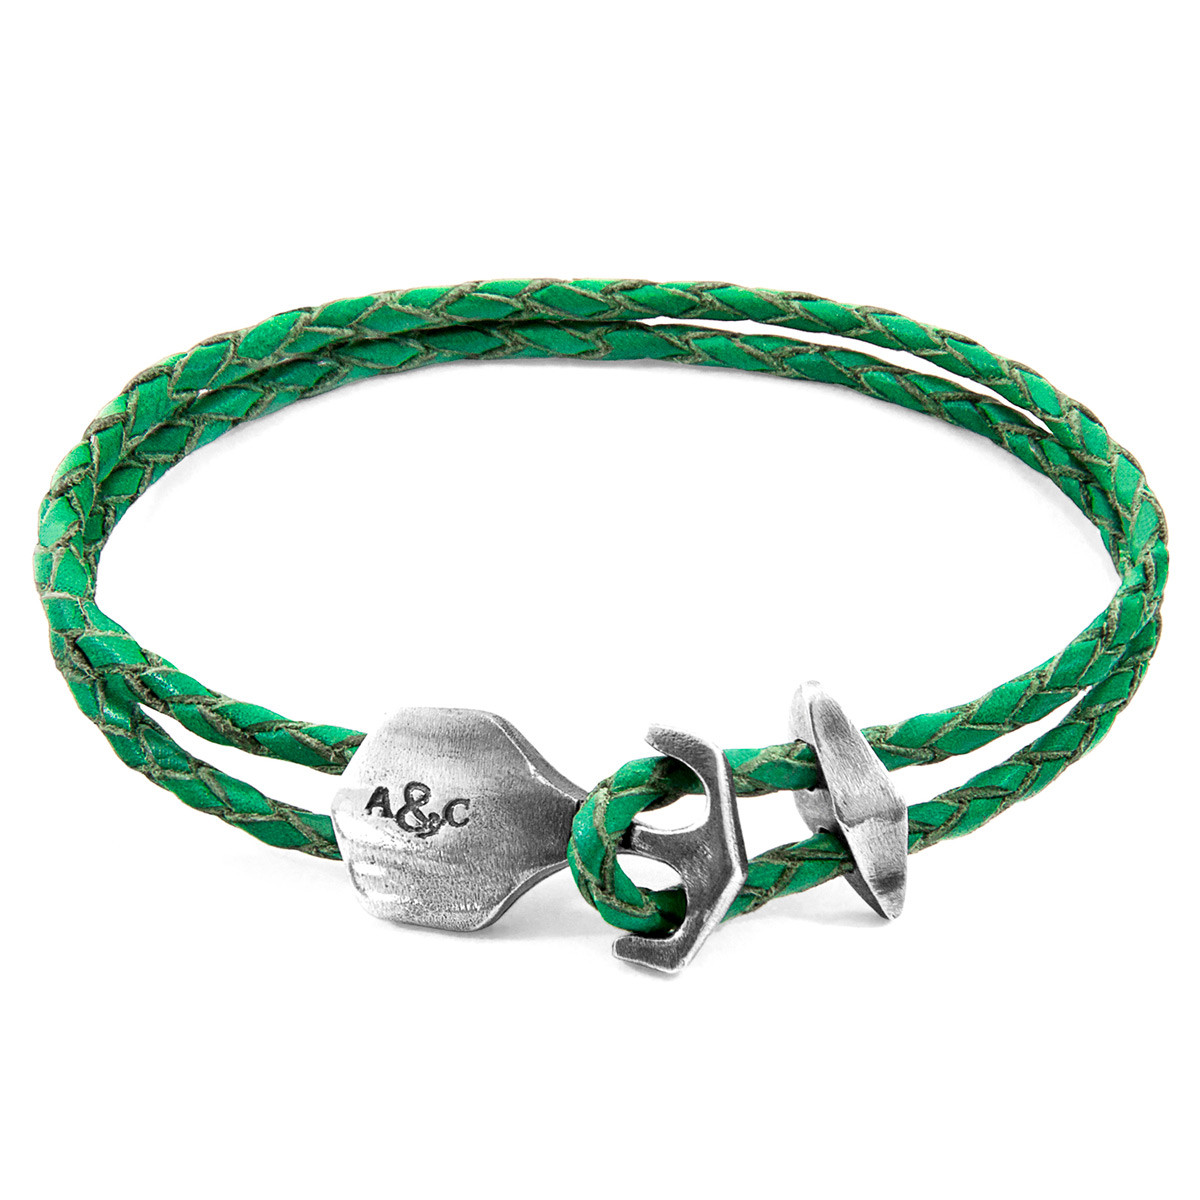 Anchor & Crew Fern Green Delta Anchor Silver and Braided Leather Bracelet